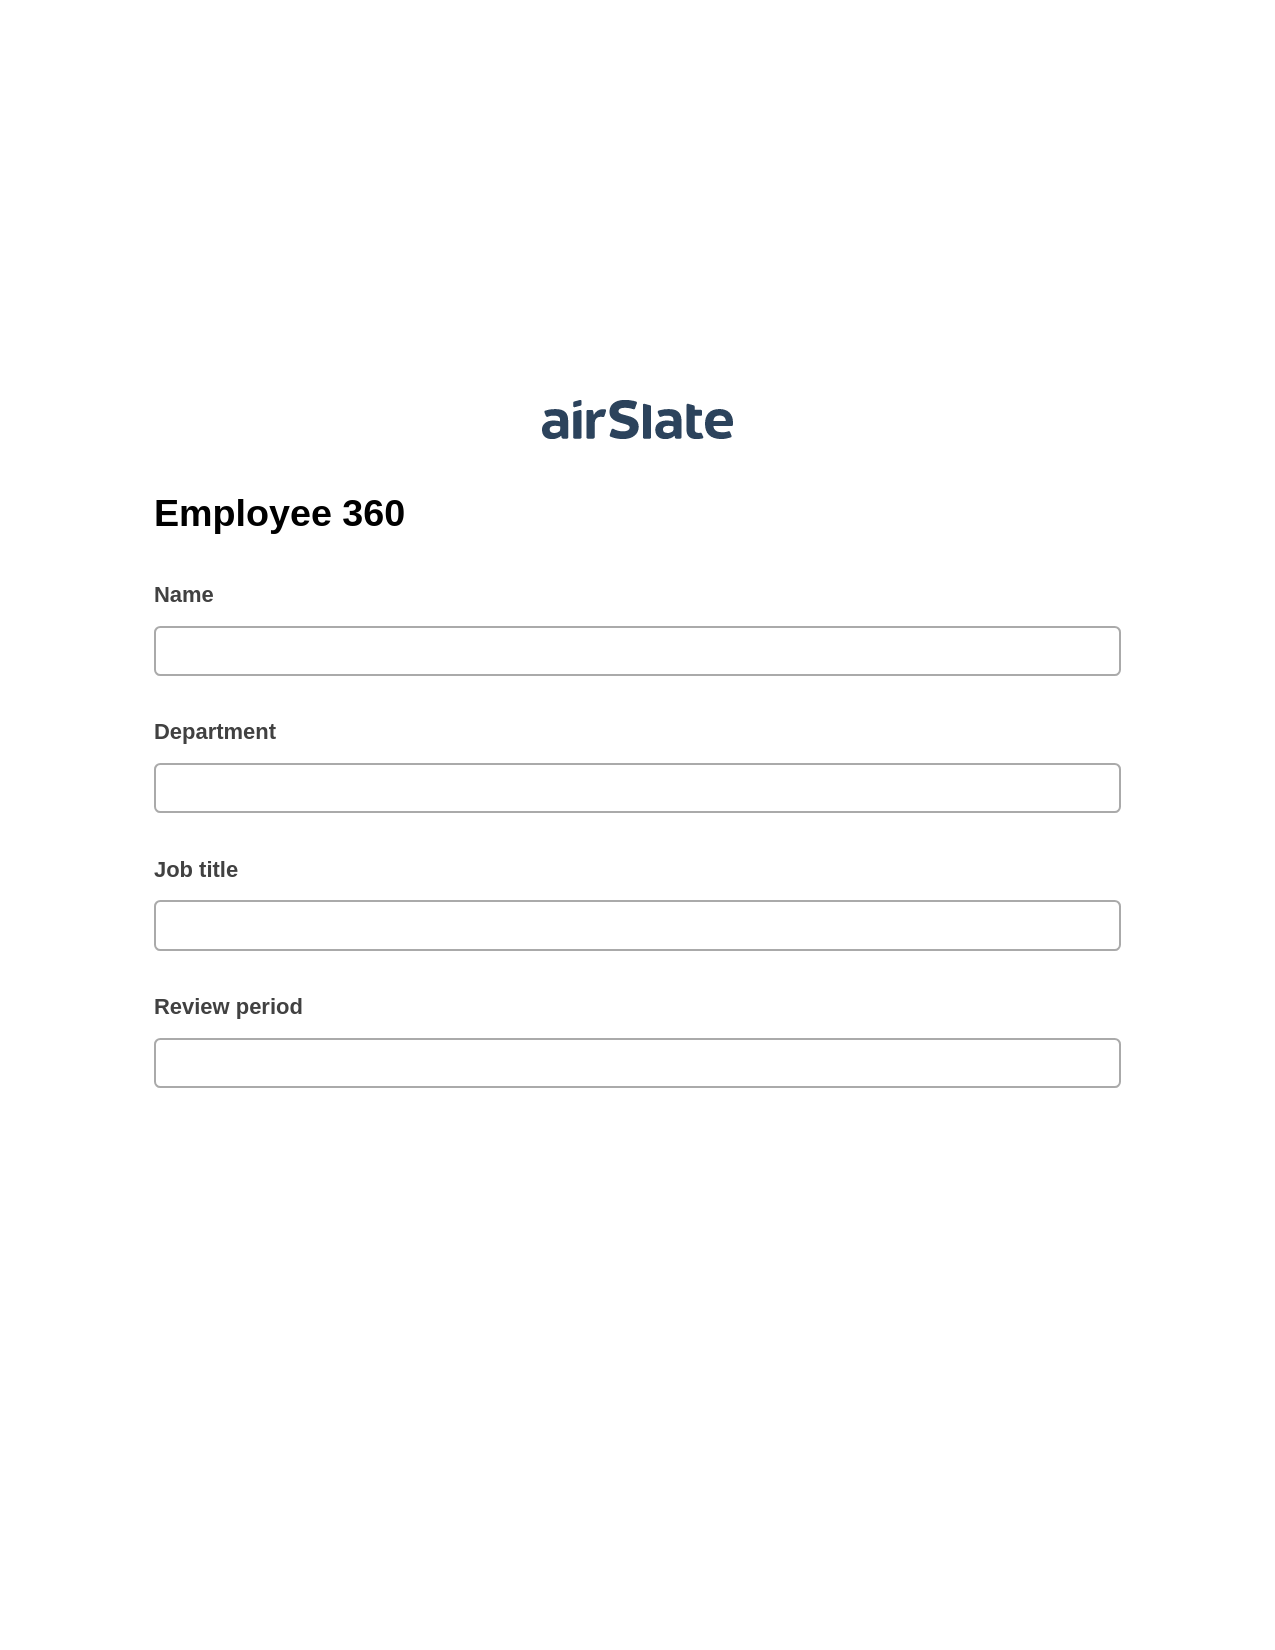 Multirole Employee 360 Pre-fill from another Slate Bot, Rename Slate Bot, Export to Excel 365 Bot